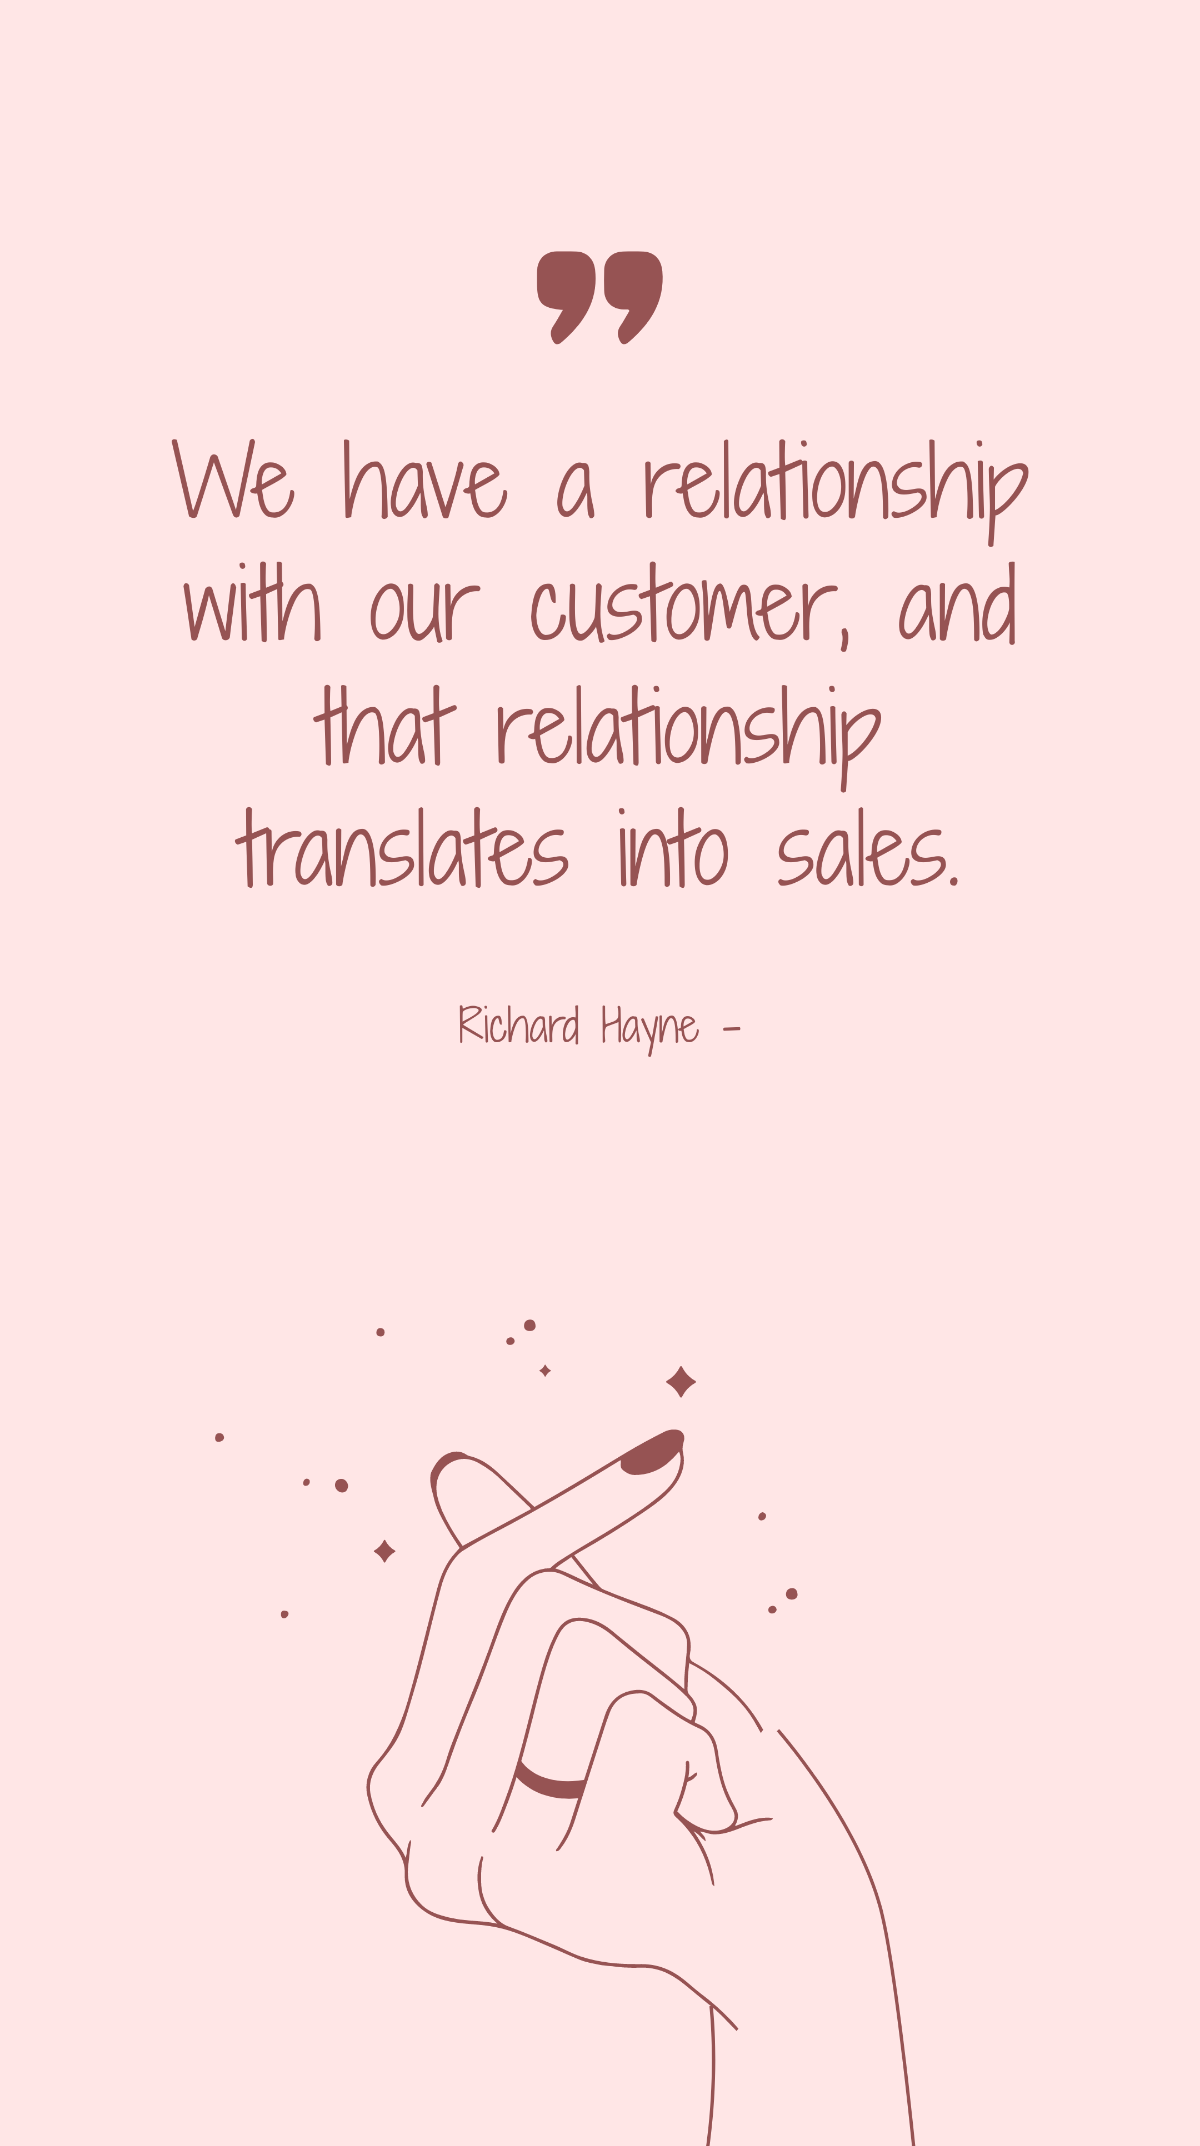 Richard Hayne - We have a relationship with our customer, and that relationship translates into sales. Template